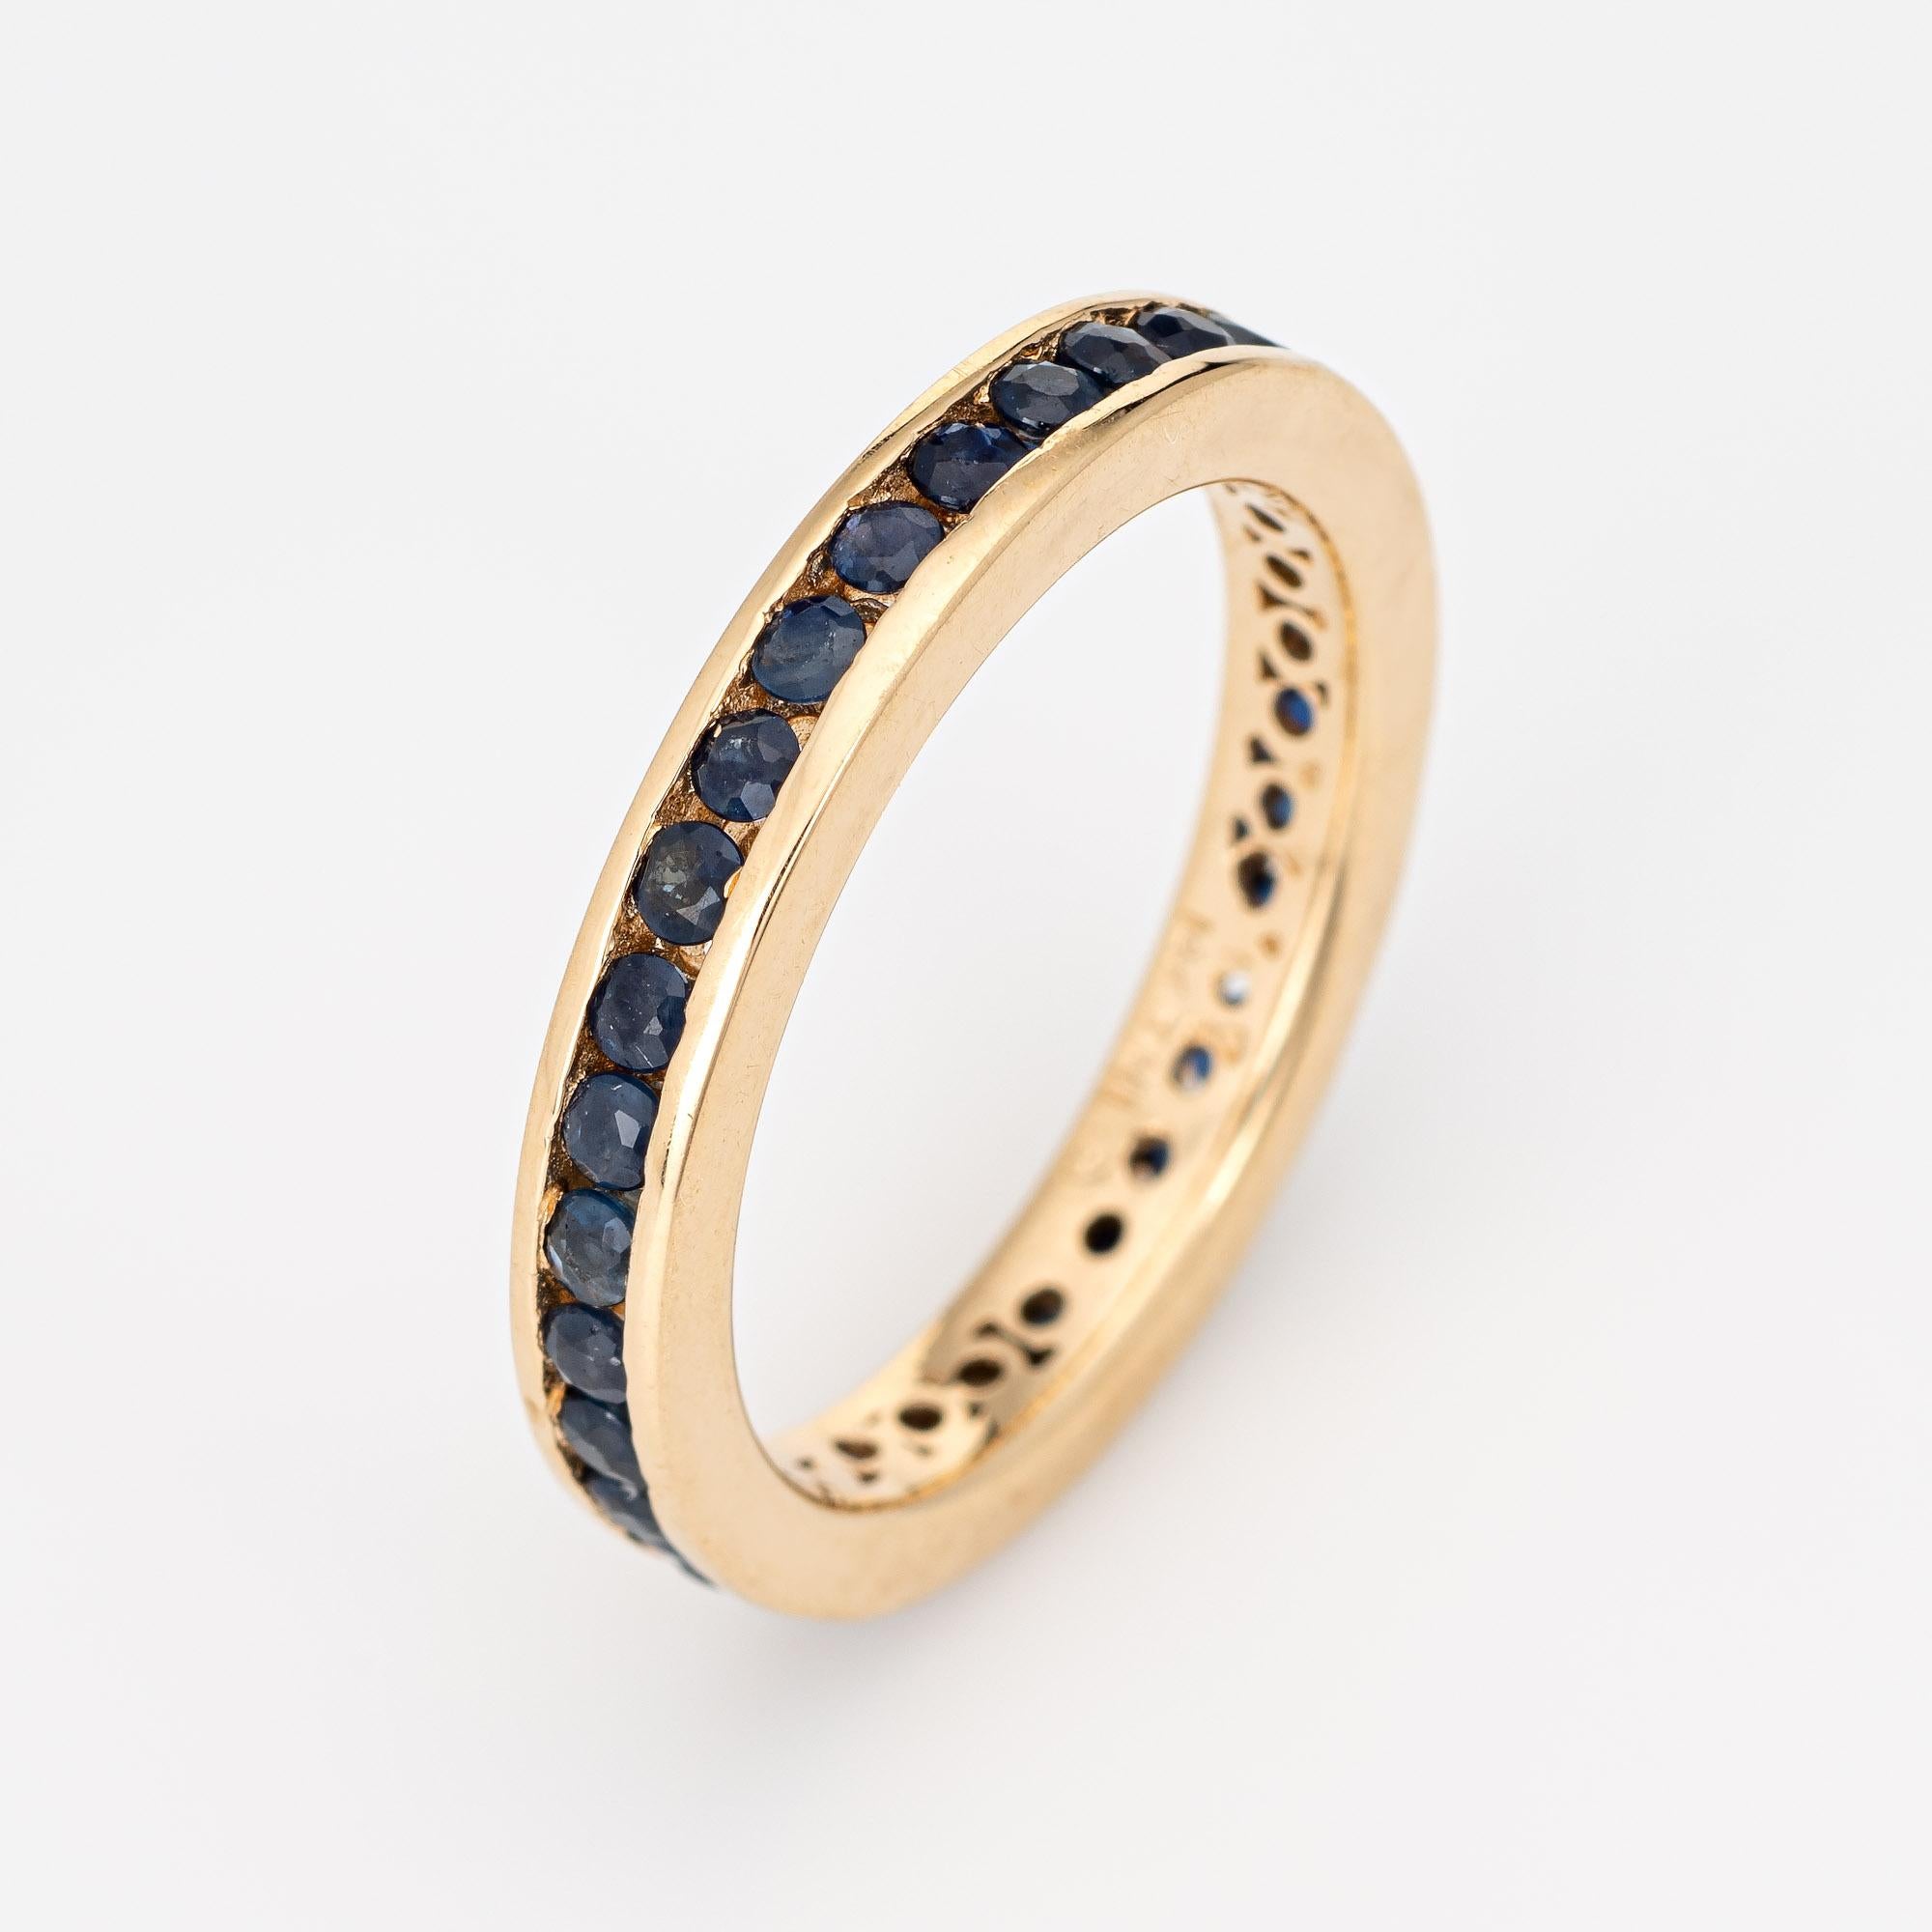 Stylish vintage blue sapphire eternity ring crafted in 14 karat yellow gold. 

34 blue sapphires are estimated at 0.02 carats each and total an estimated 0.68 carats. The sapphires are in excellent condition and free of cracks or chips. 

The